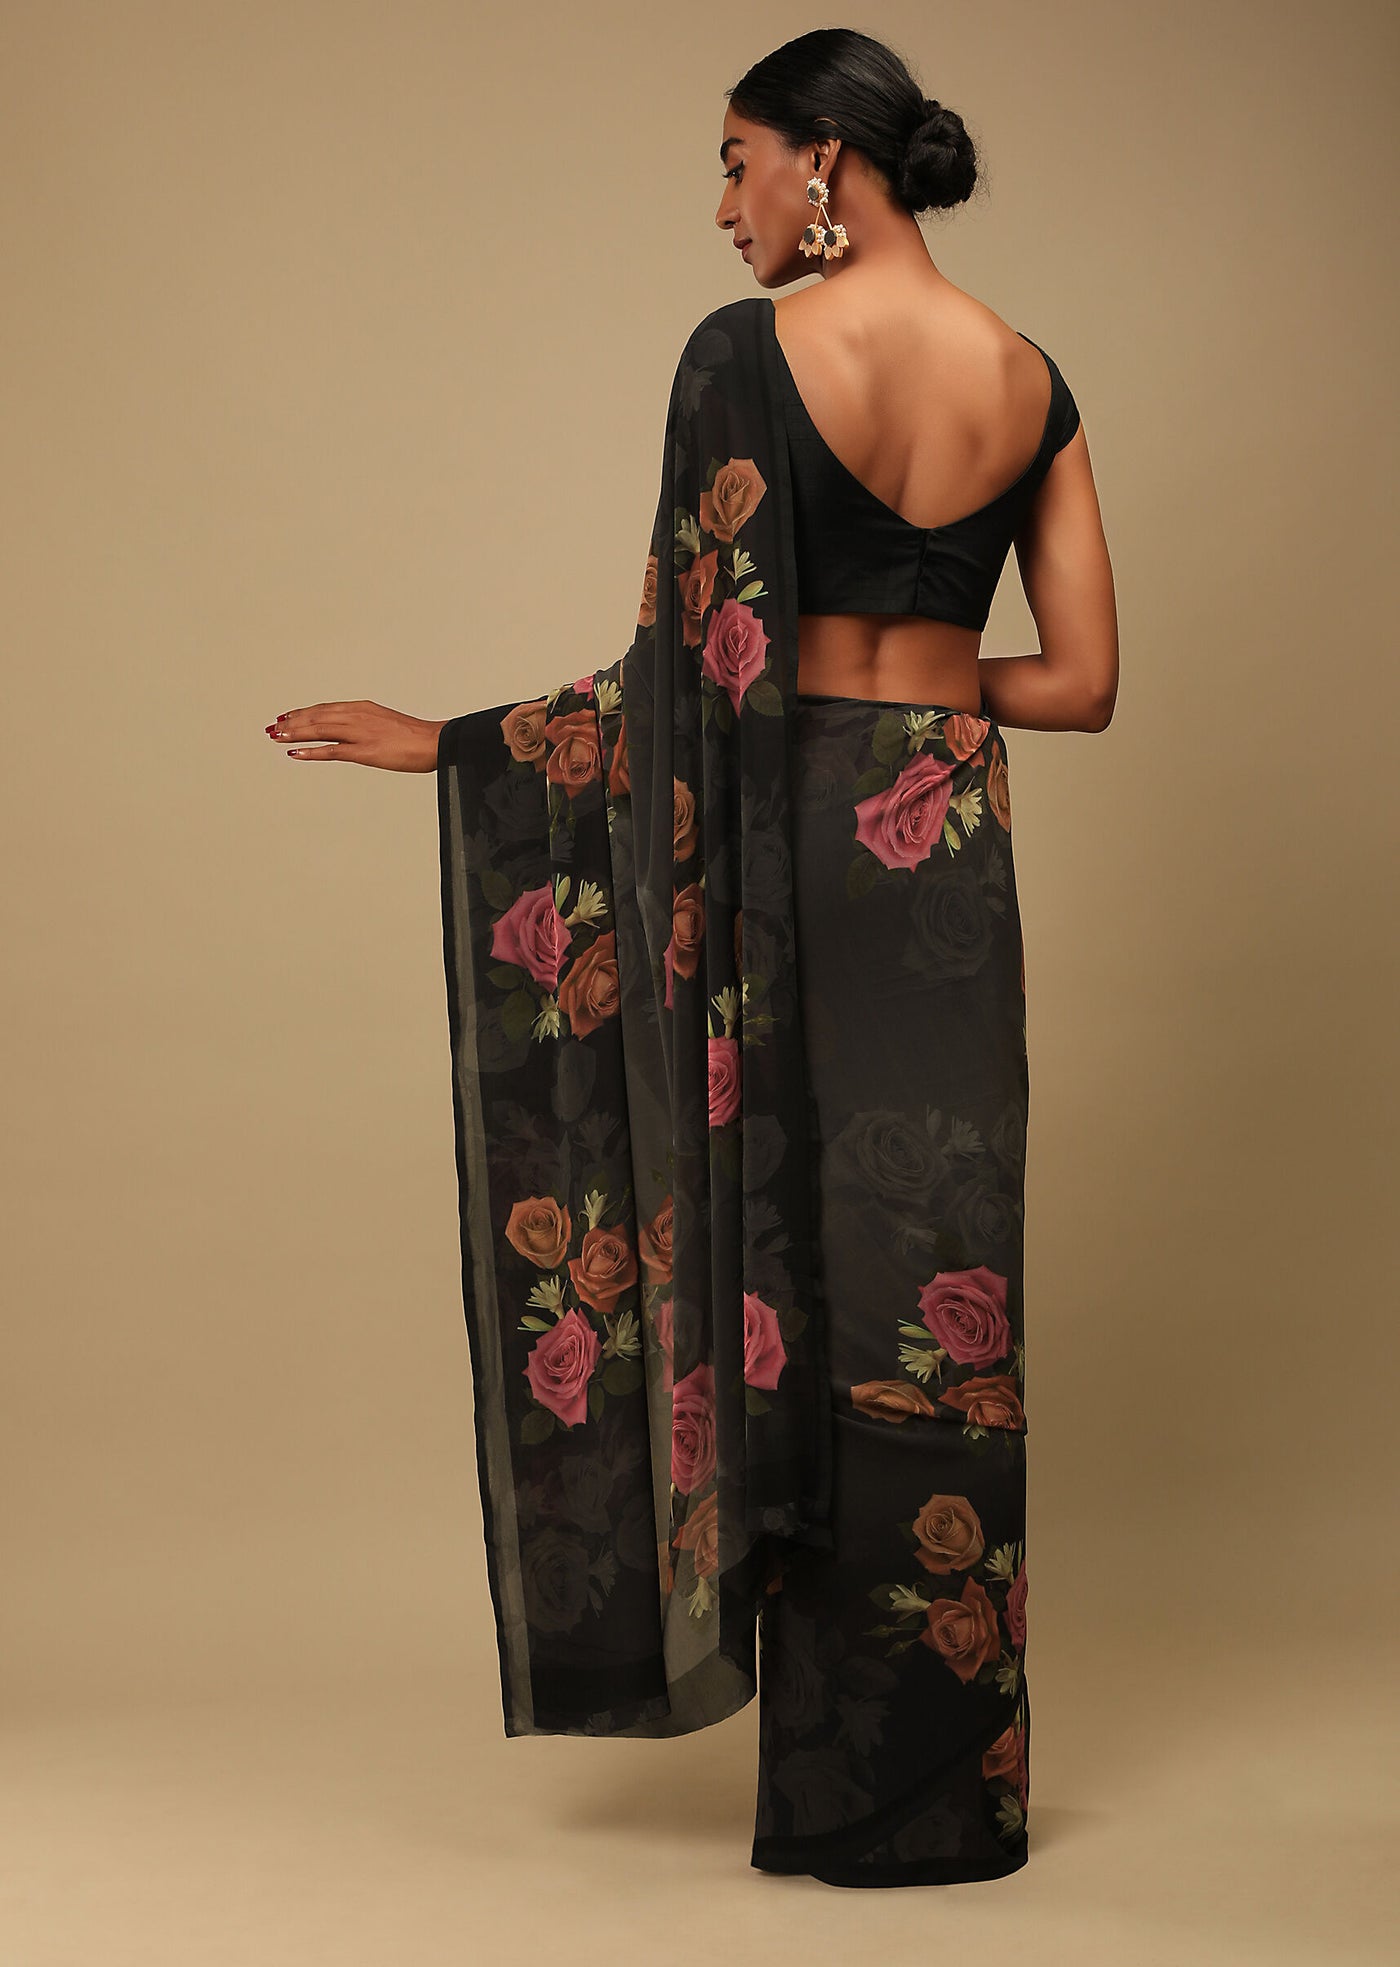 Black Rose Print Saree - Indian Clothing in Denver, CO, Aurora, CO, Boulder, CO, Fort Collins, CO, Colorado Springs, CO, Parker, CO, Highlands Ranch, CO, Cherry Creek, CO, Centennial, CO, and Longmont, CO. Nationwide shipping USA - India Fashion X